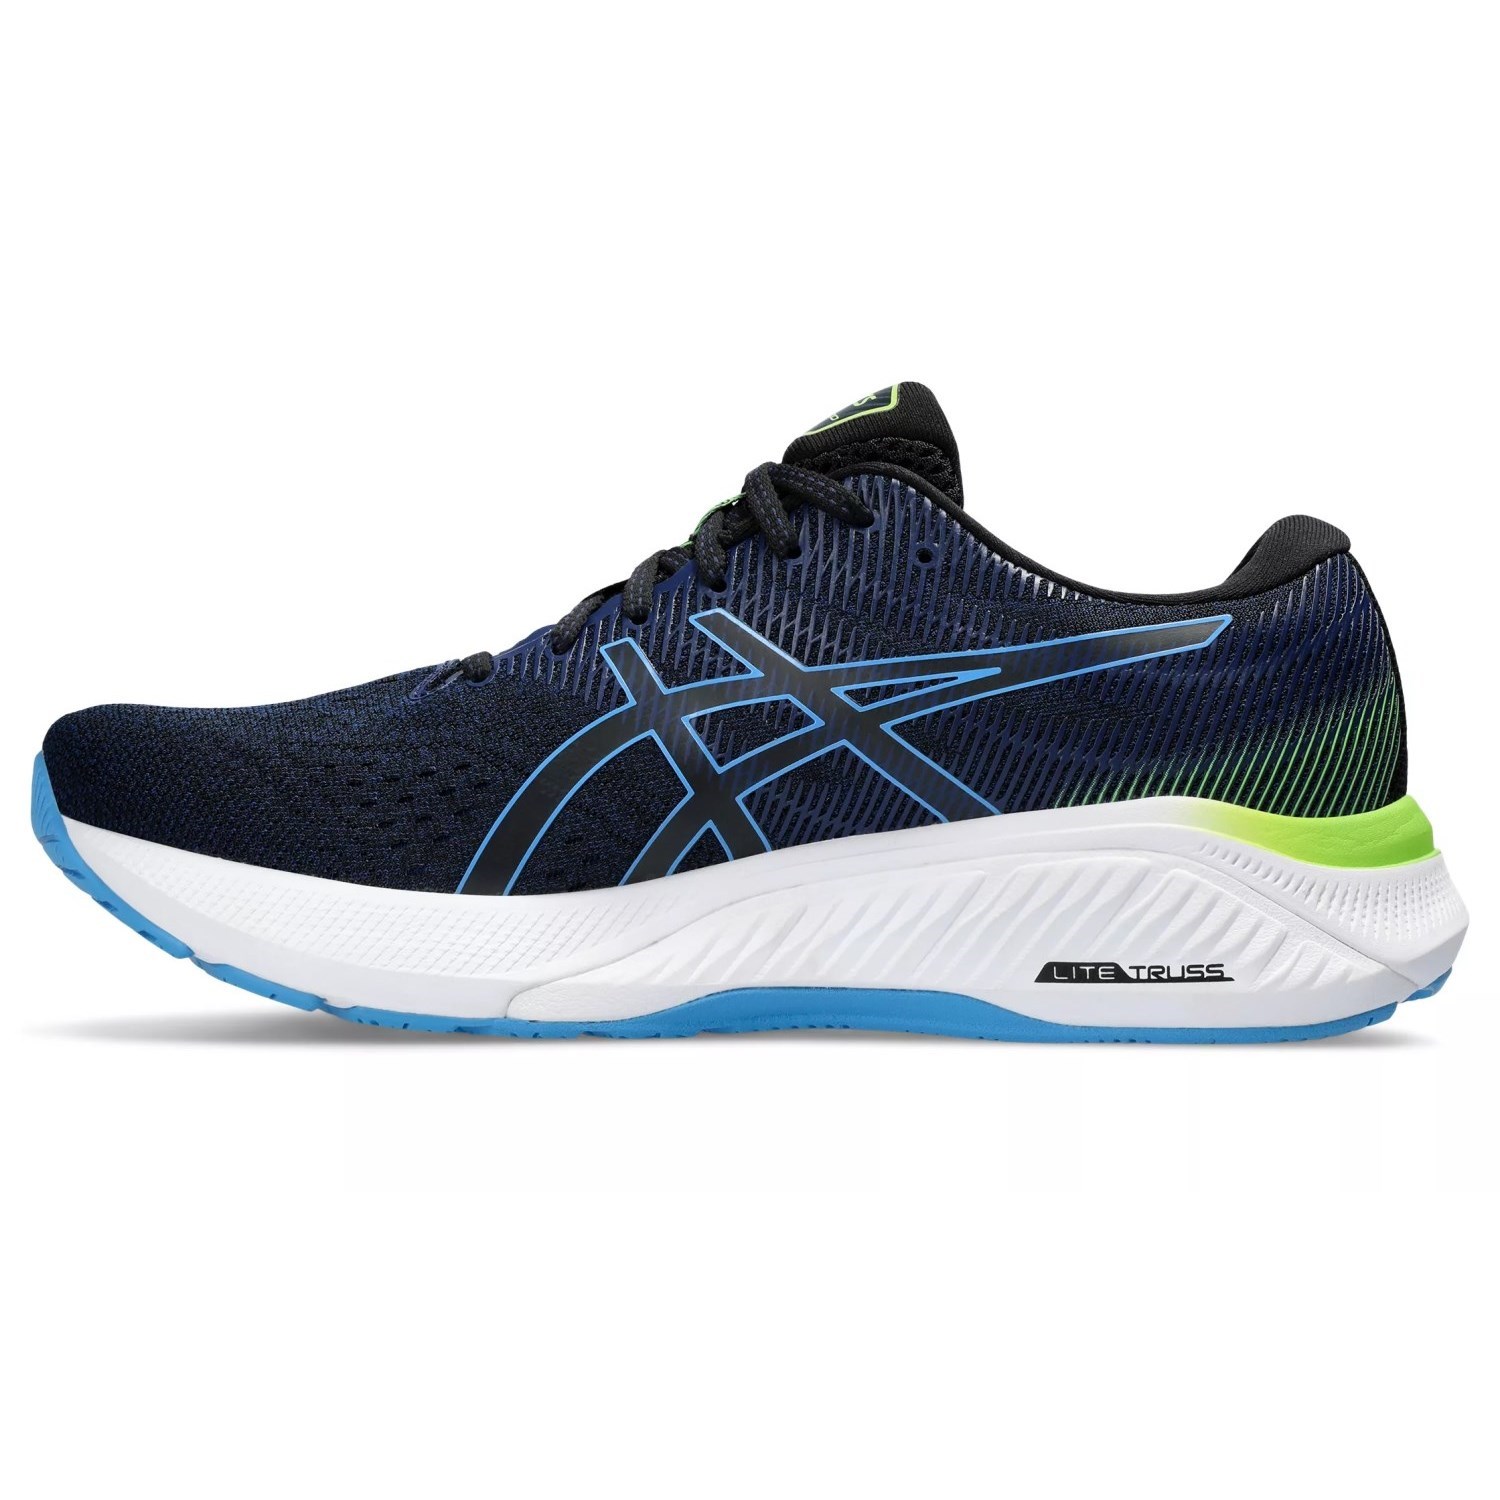 Asics GT-4000 3 - Mens Running Shoes - Black/Waterscape | Sportitude